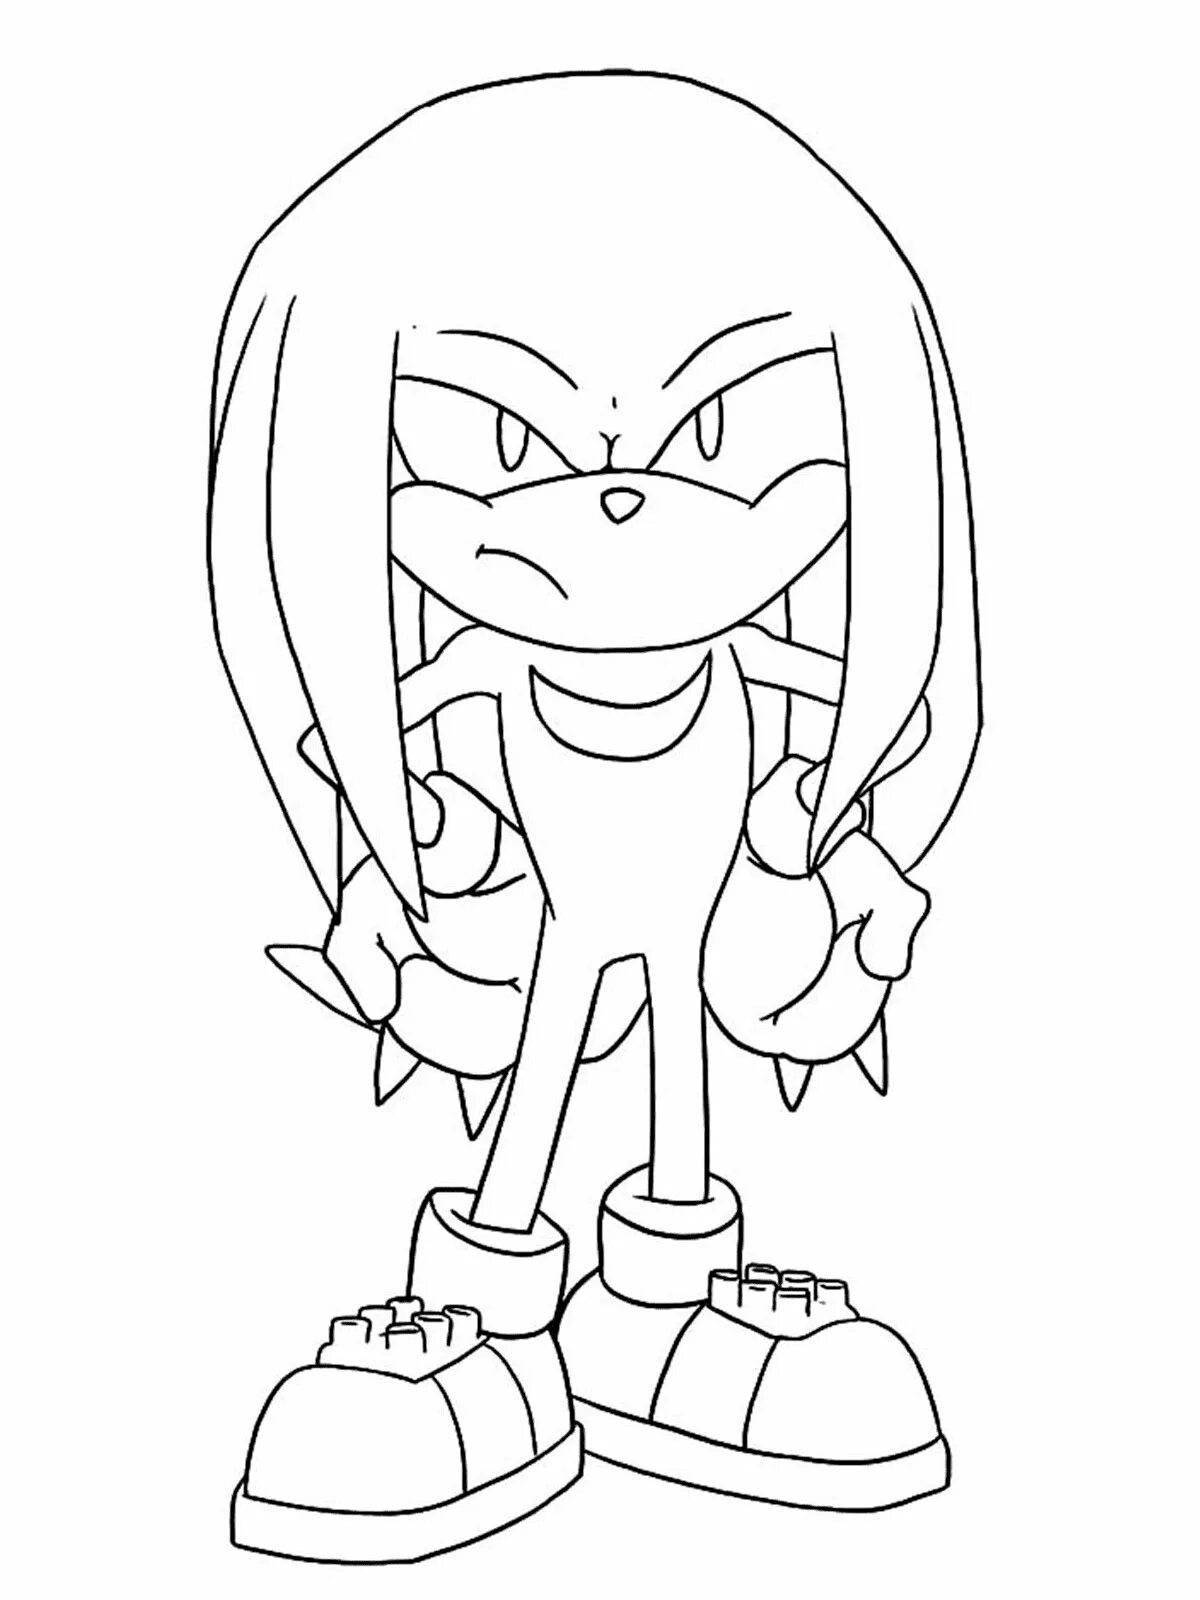 Super knuckles bright coloring